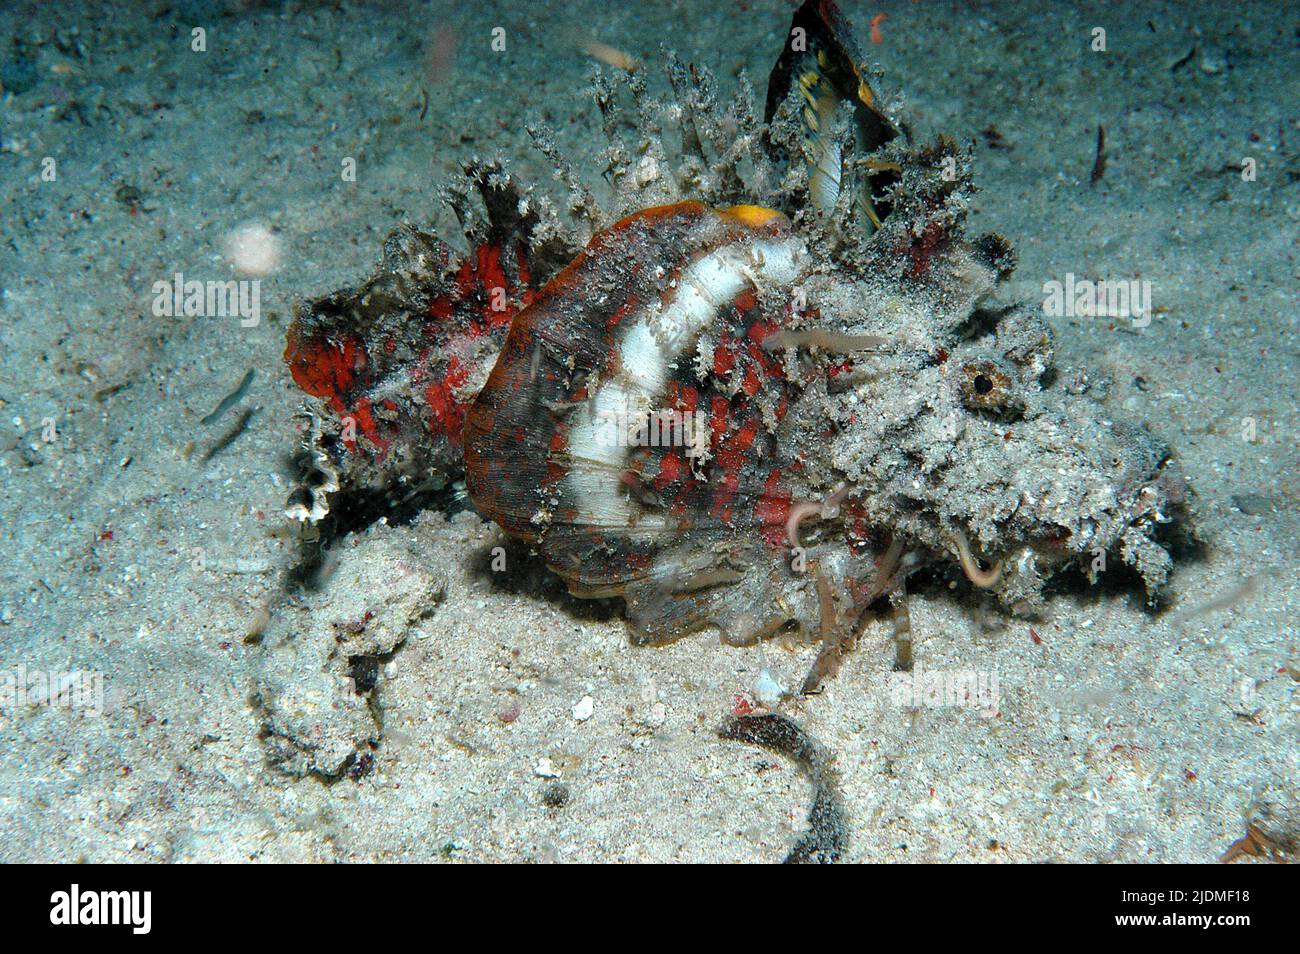 Devil fish, Demon stinger or devil stinger (Inimicus didactylus), walking over sandy seabed, extremly toxic, Borneo, Malaysia Stock Photo